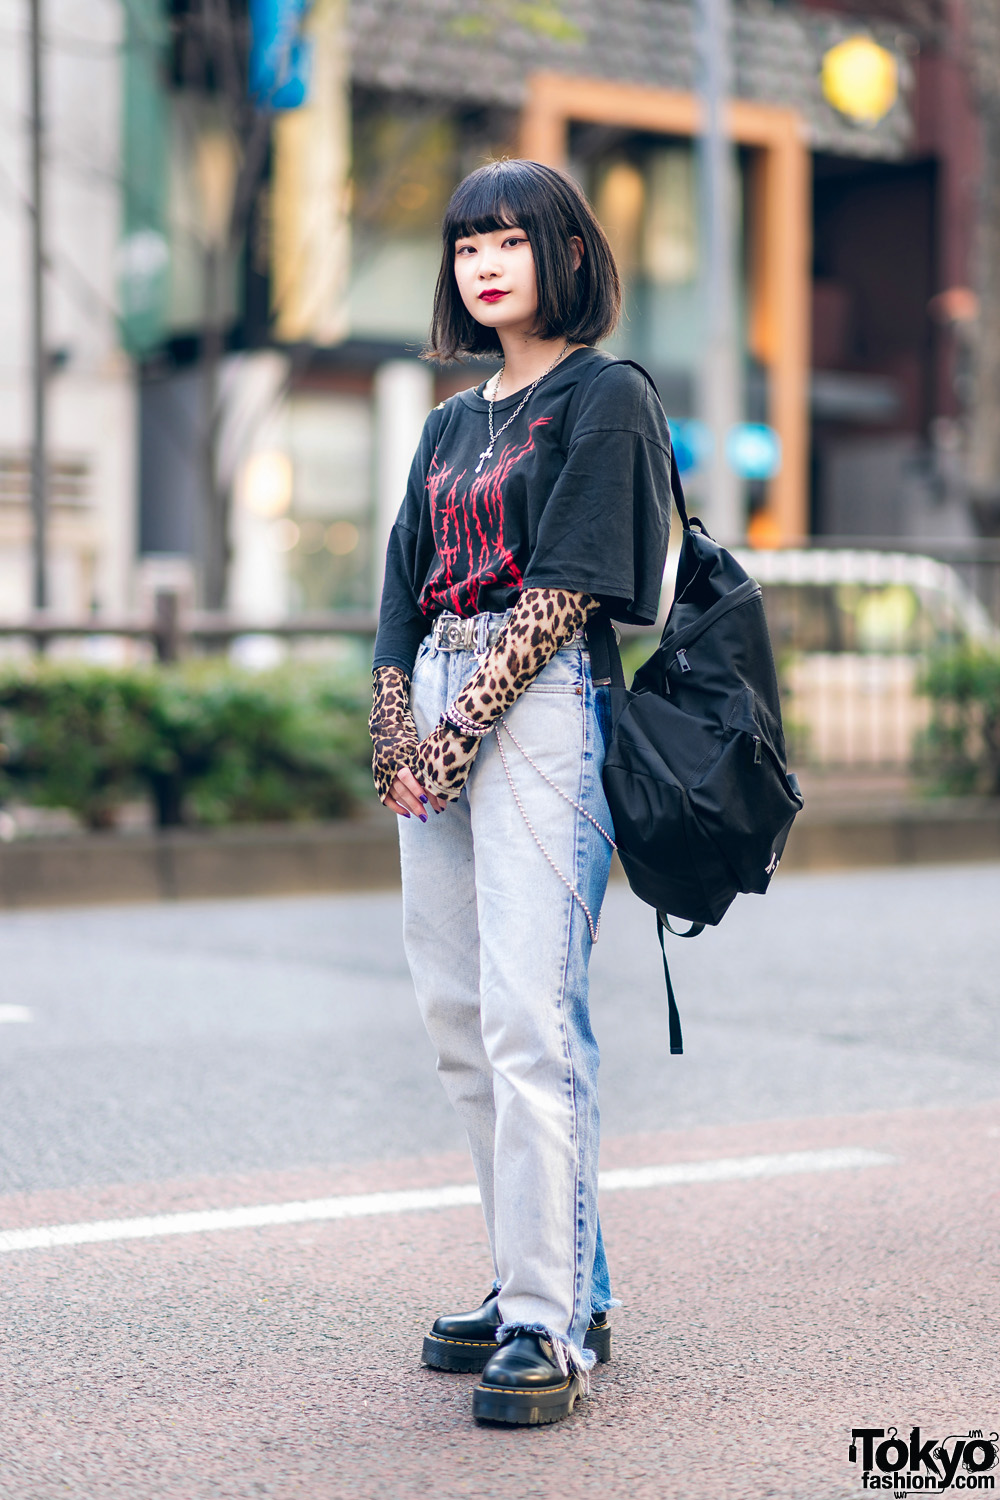 Casual Tokyo Streetwear Style w/ Fringed Bob, Faith Tokyo Acid Wash Jeans, Dr. Martens Shoes, Groovy, Another Youth & Basic Cotton Backpack